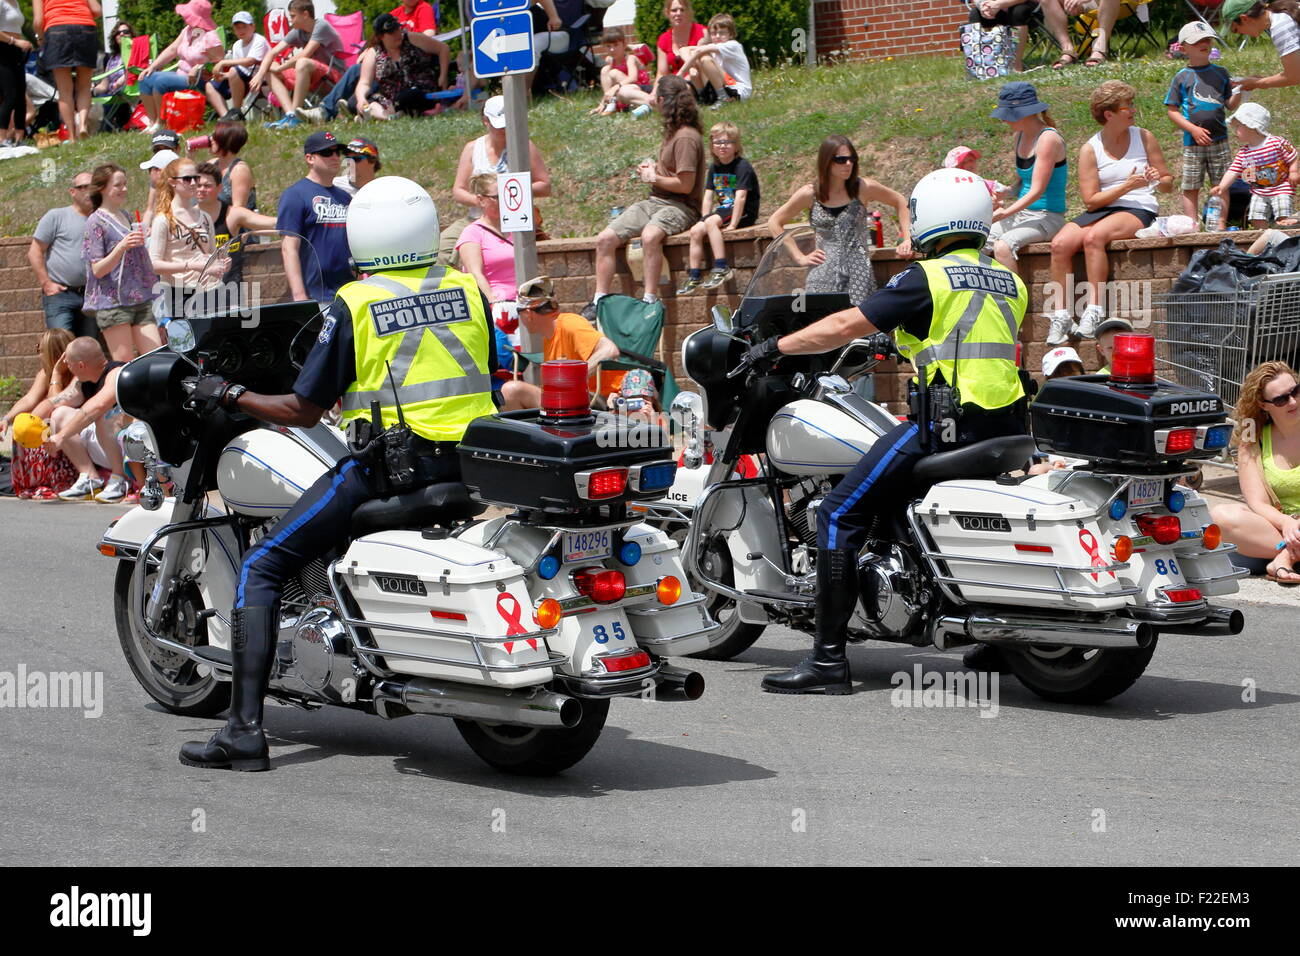 Two policemen one black and one white on police motorcycles beside a crowd of people enforcing the law and watching Stock Photo